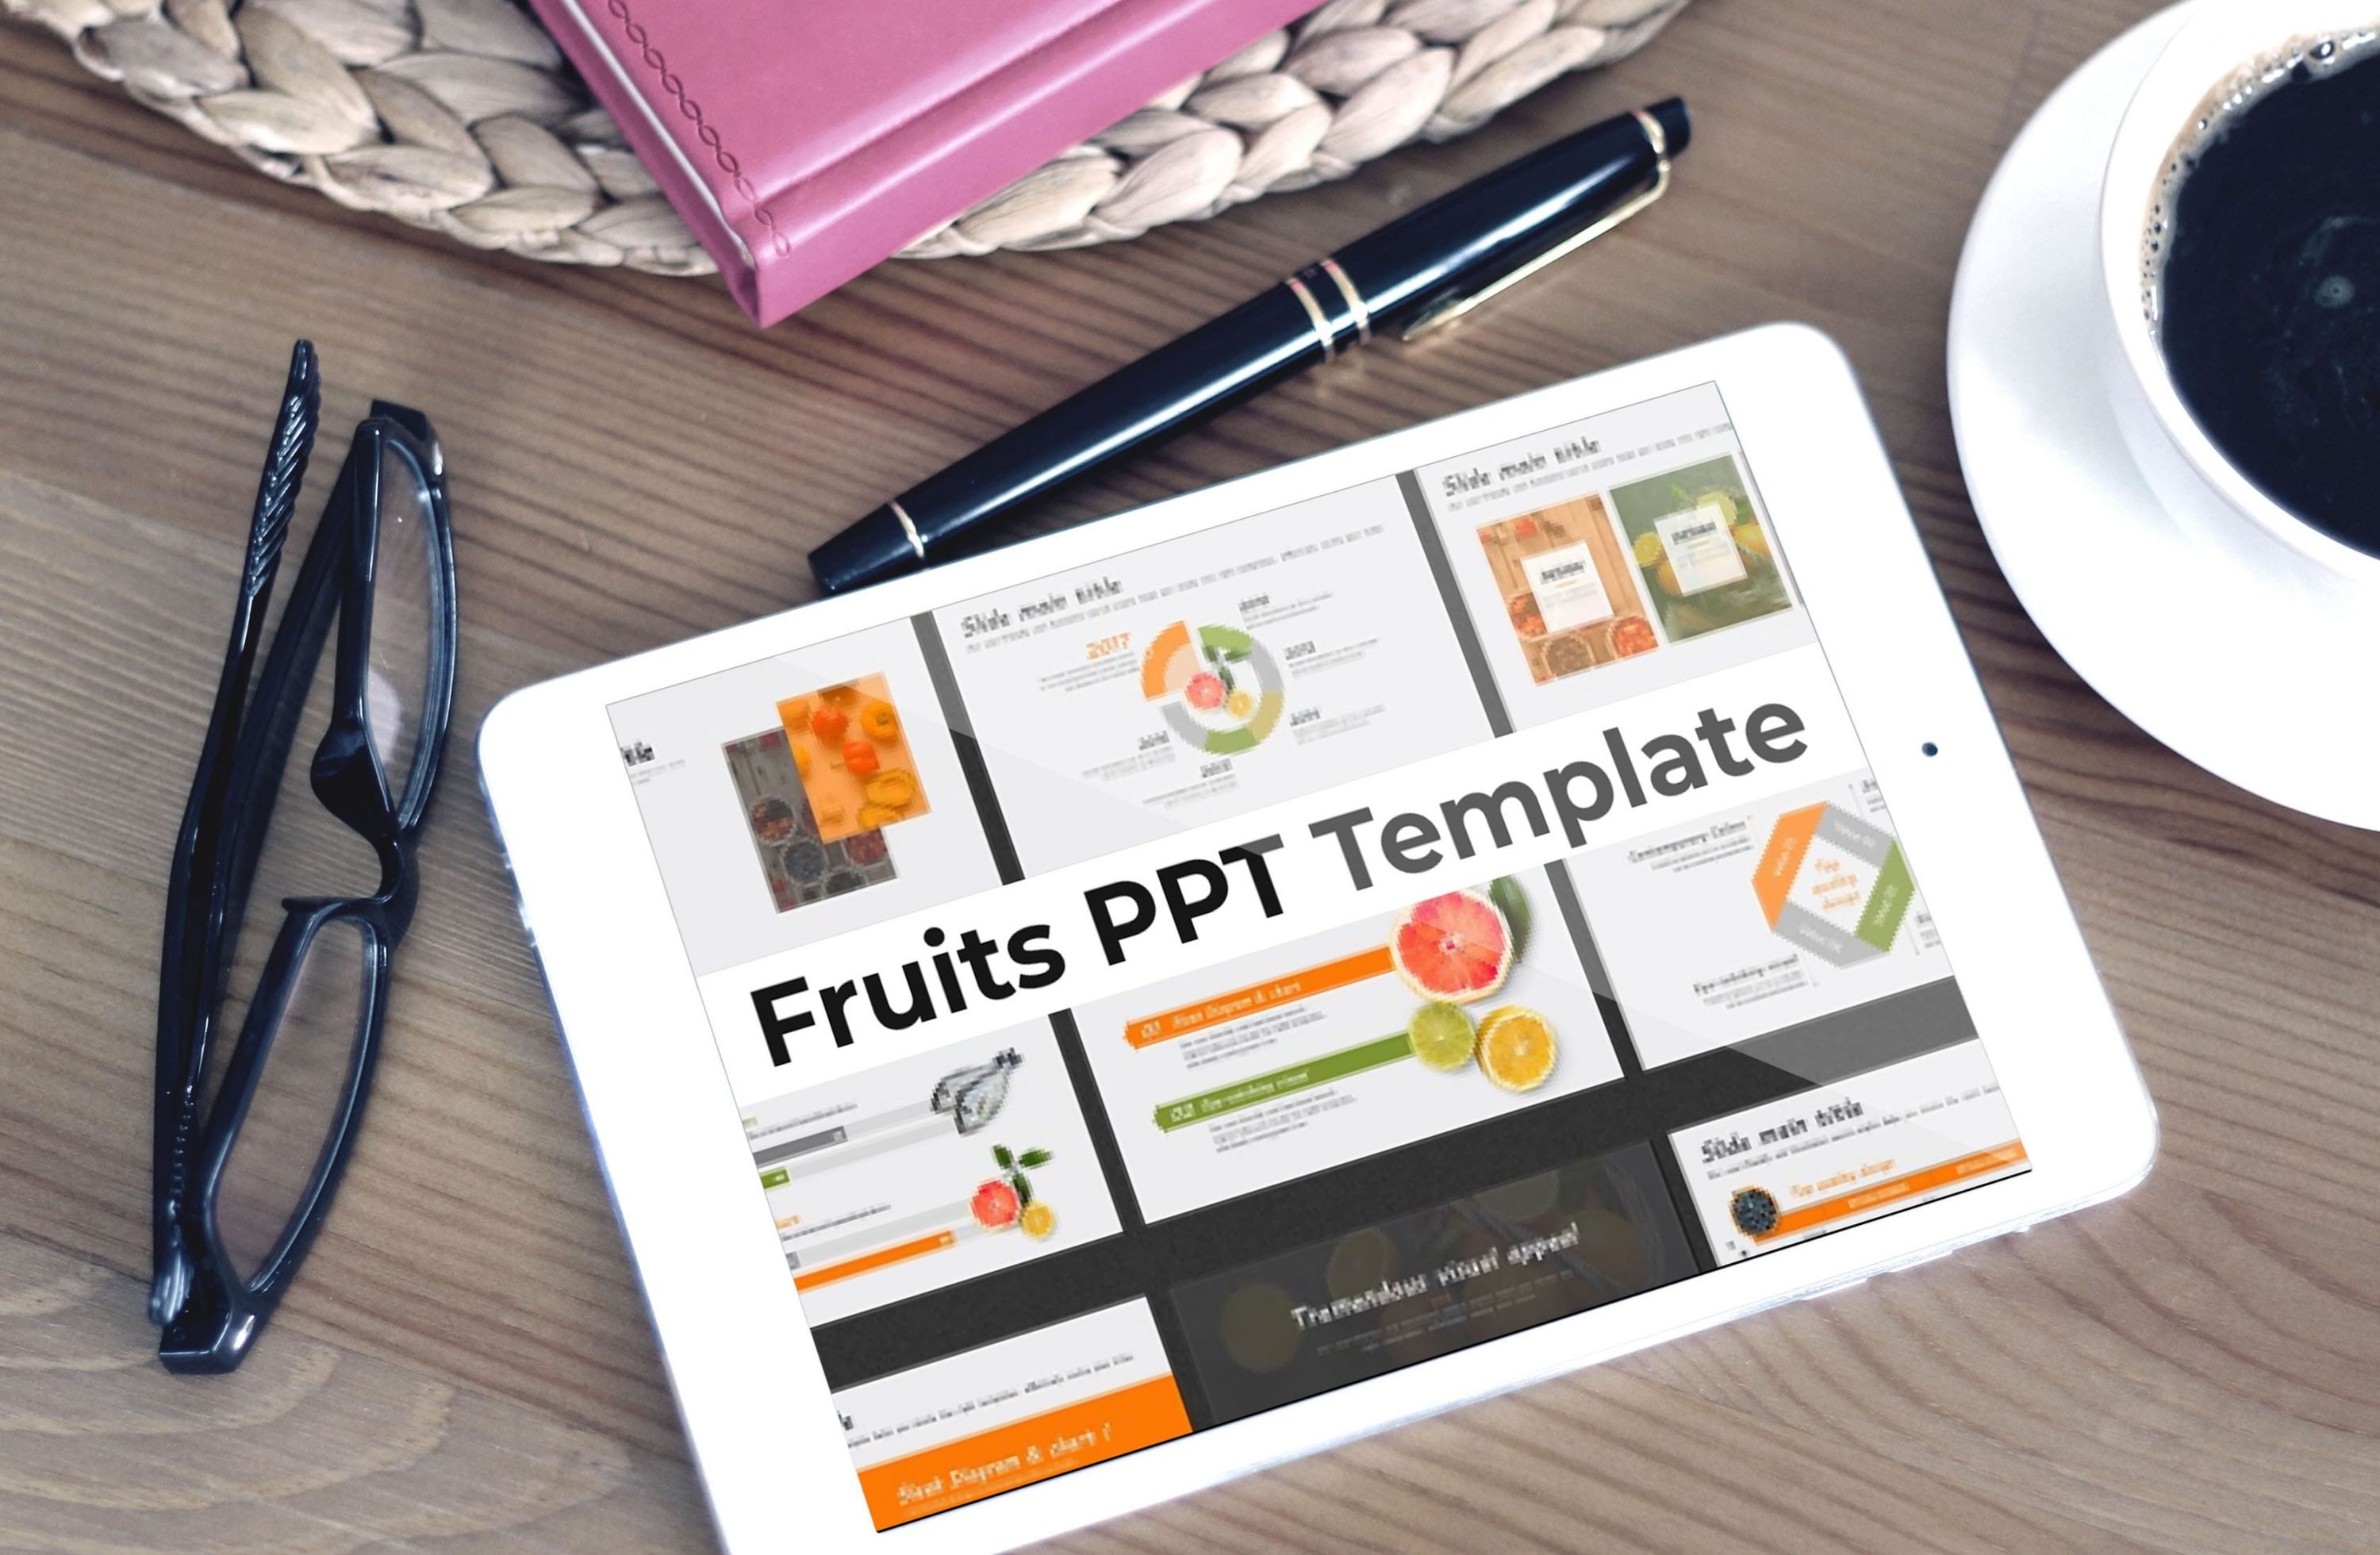 Tablet option of the Fruits PPT Template.